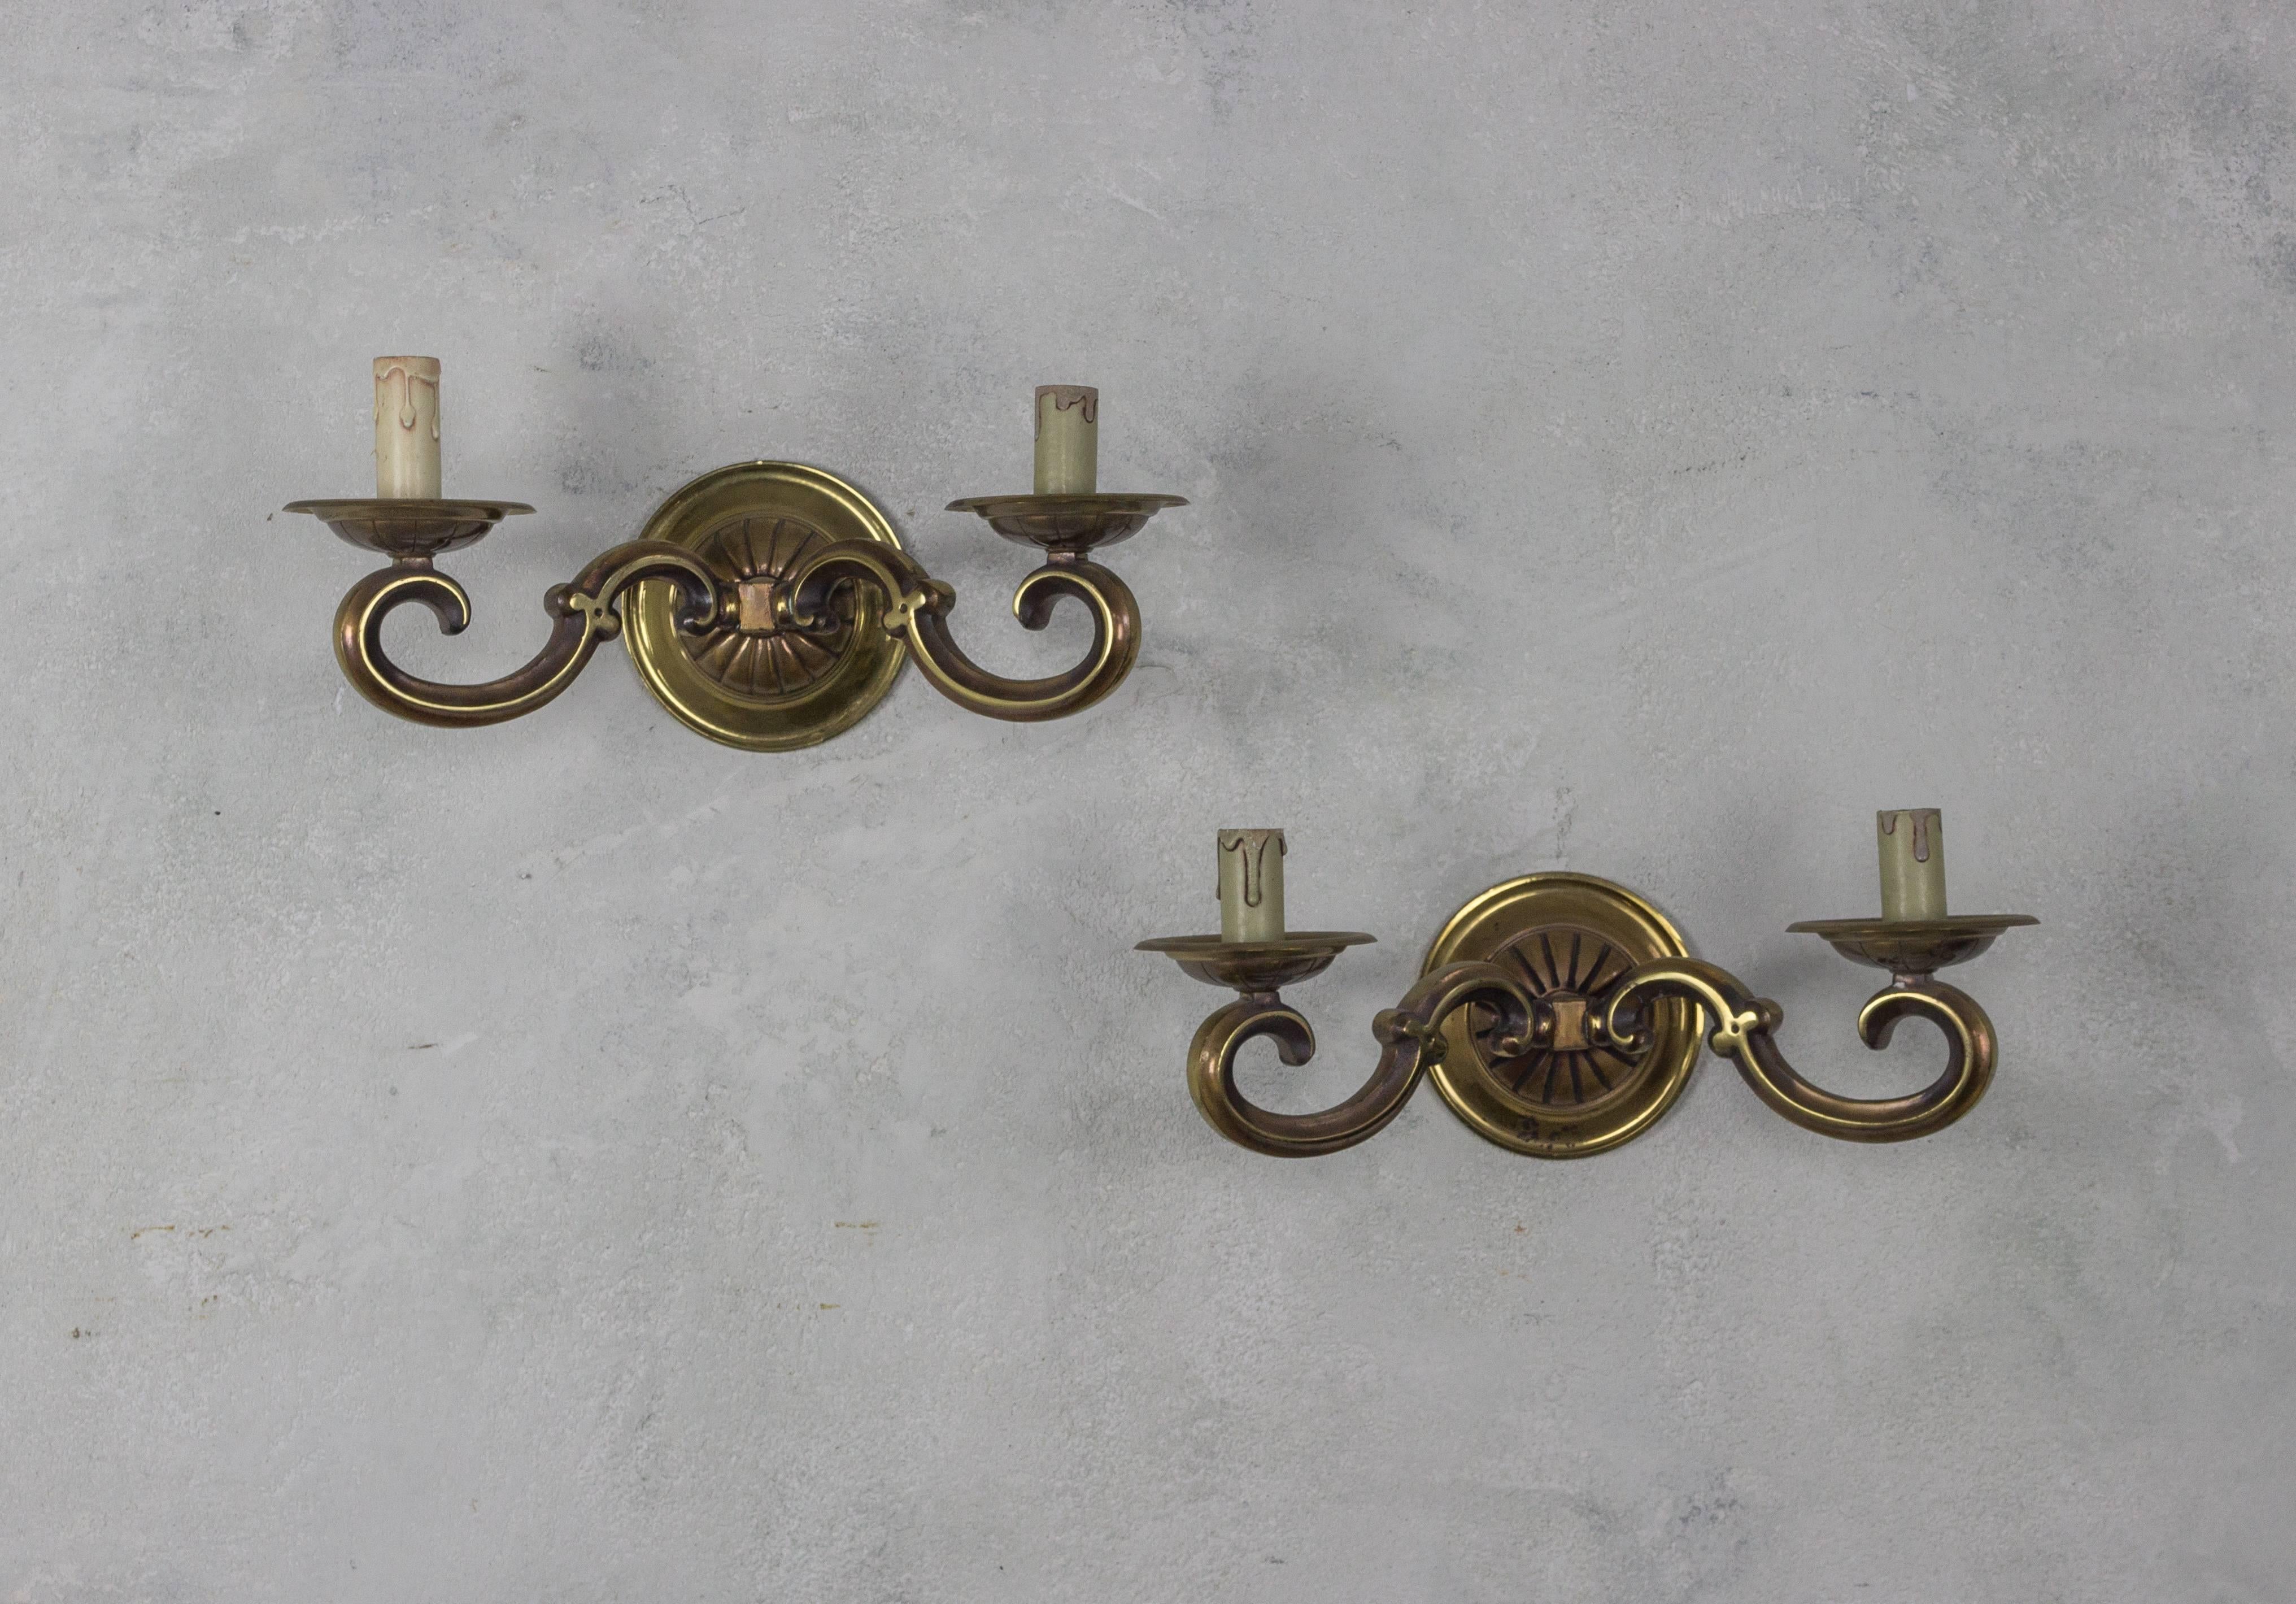 This pair of gilt bronze sconces, hailing from France in the 1940s, is a striking example of vintage lighting. Each sconce features two arms and is finished in a gilt bronze that has maintained its lustre over the years. Currently wired for showroom